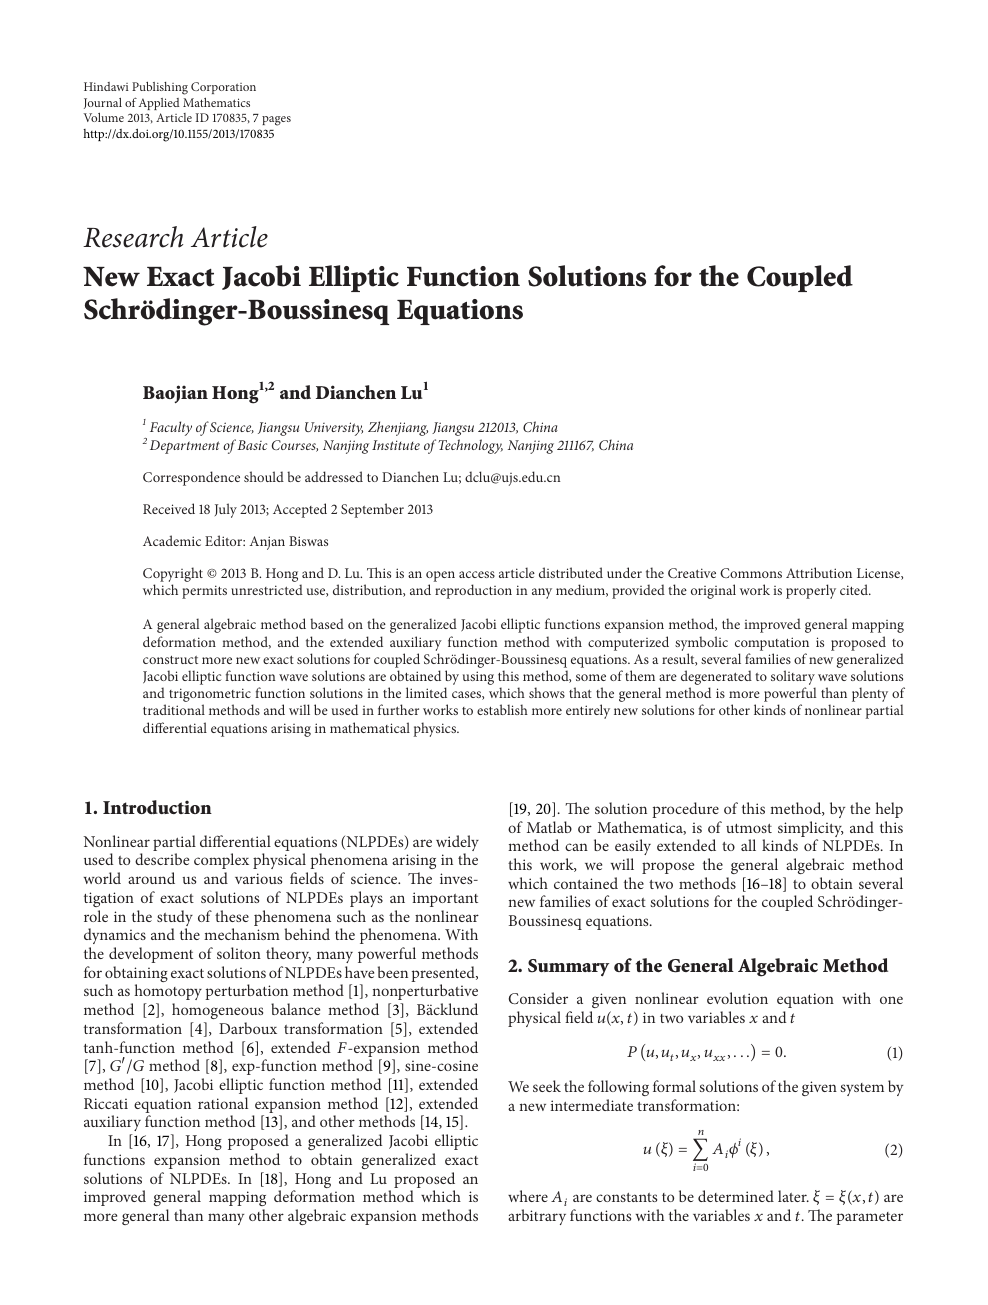 New Exact Jacobi Elliptic Function Solutions For The Coupled Schrodinger Boussinesq Equations Topic Of Research Paper In Mathematics Download Scholarly Article Pdf And Read For Free On Cyberleninka Open Science Hub